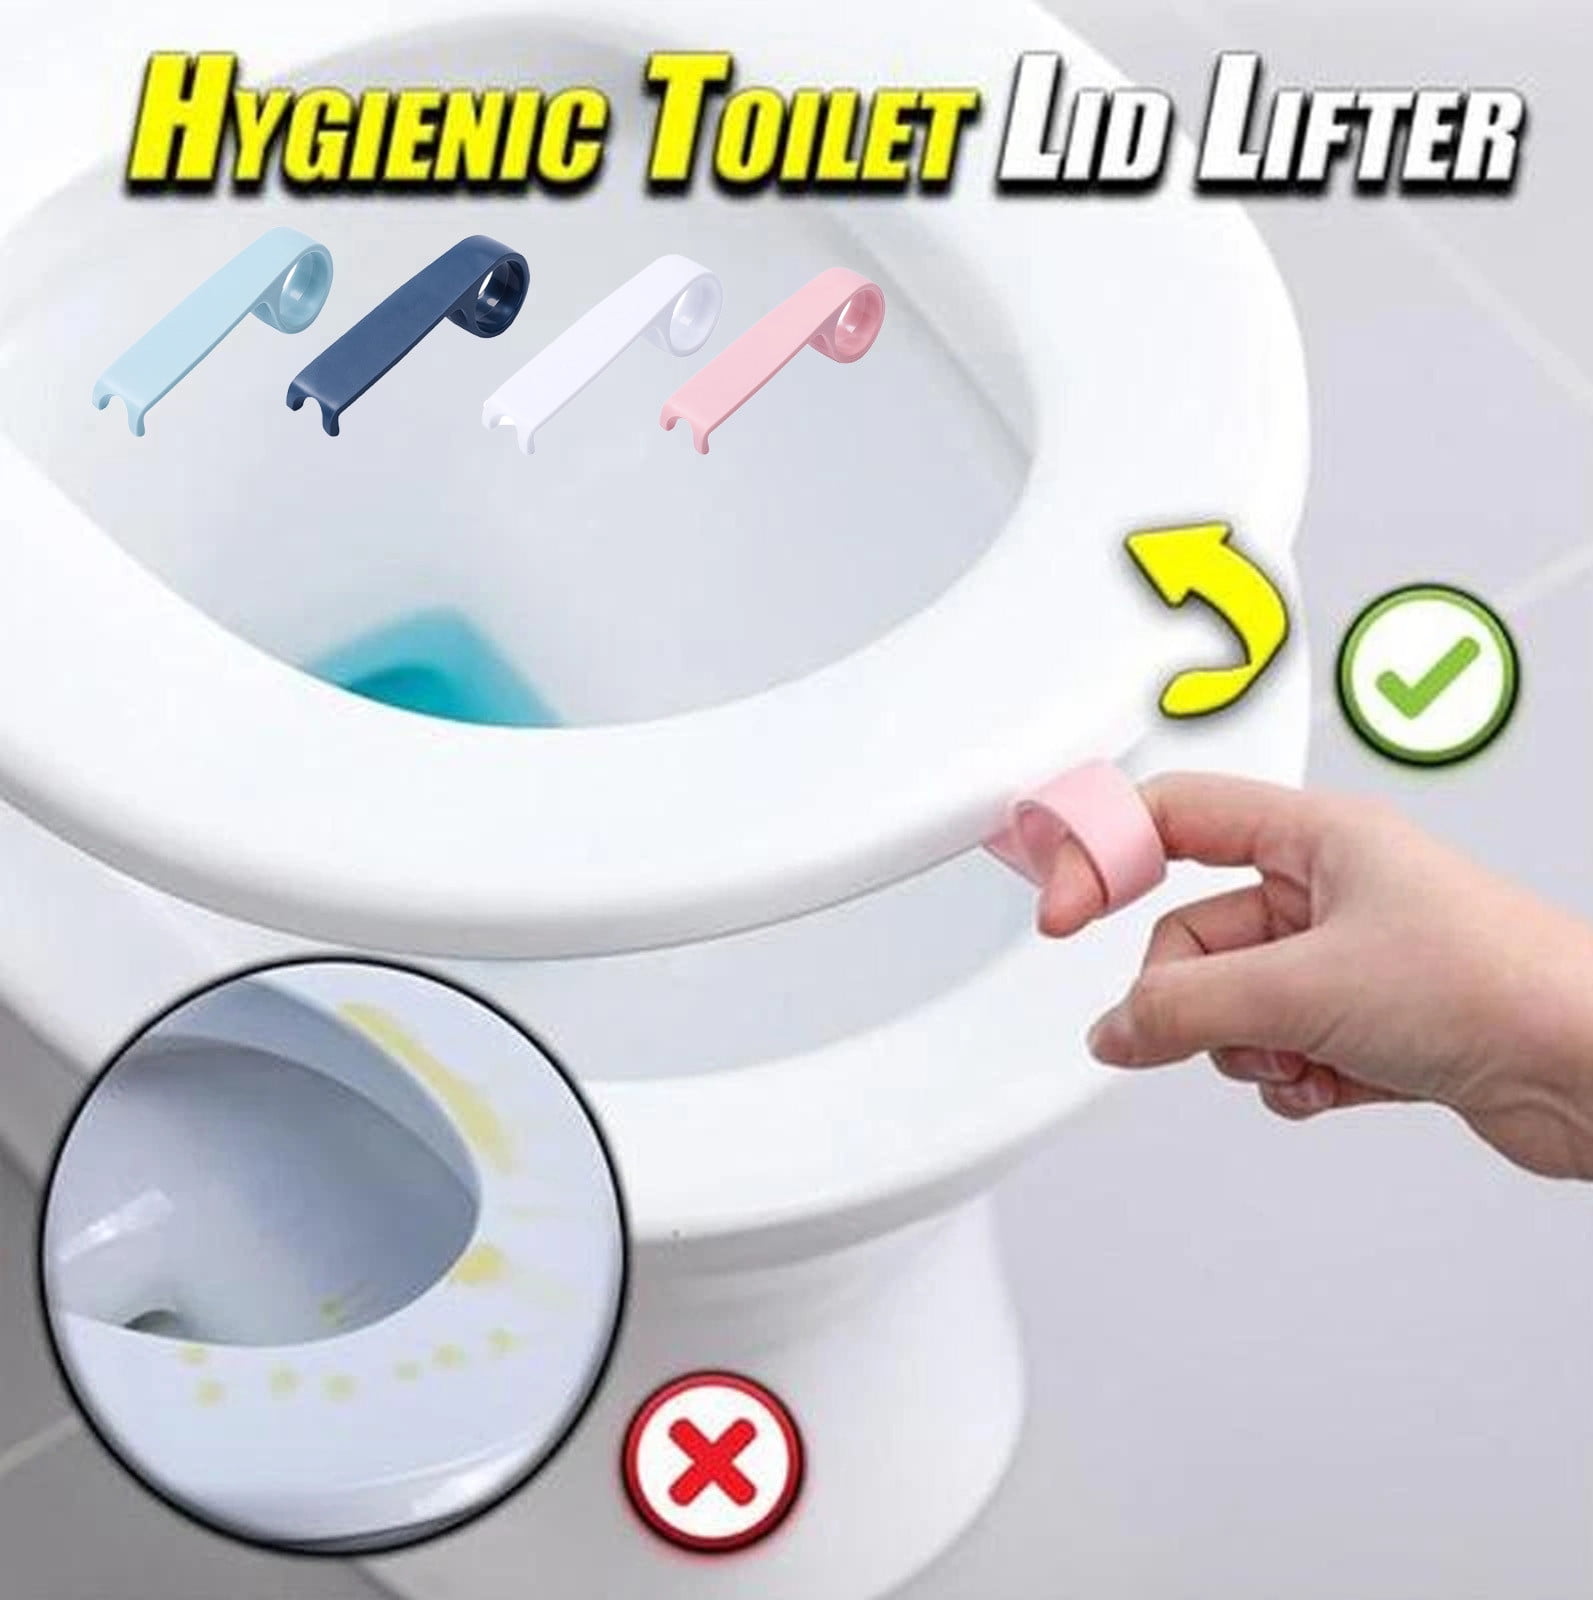 Bathroom Printed Toilet Seat Lid Cover Lifter Handle Holder Stick Avoid Touching 